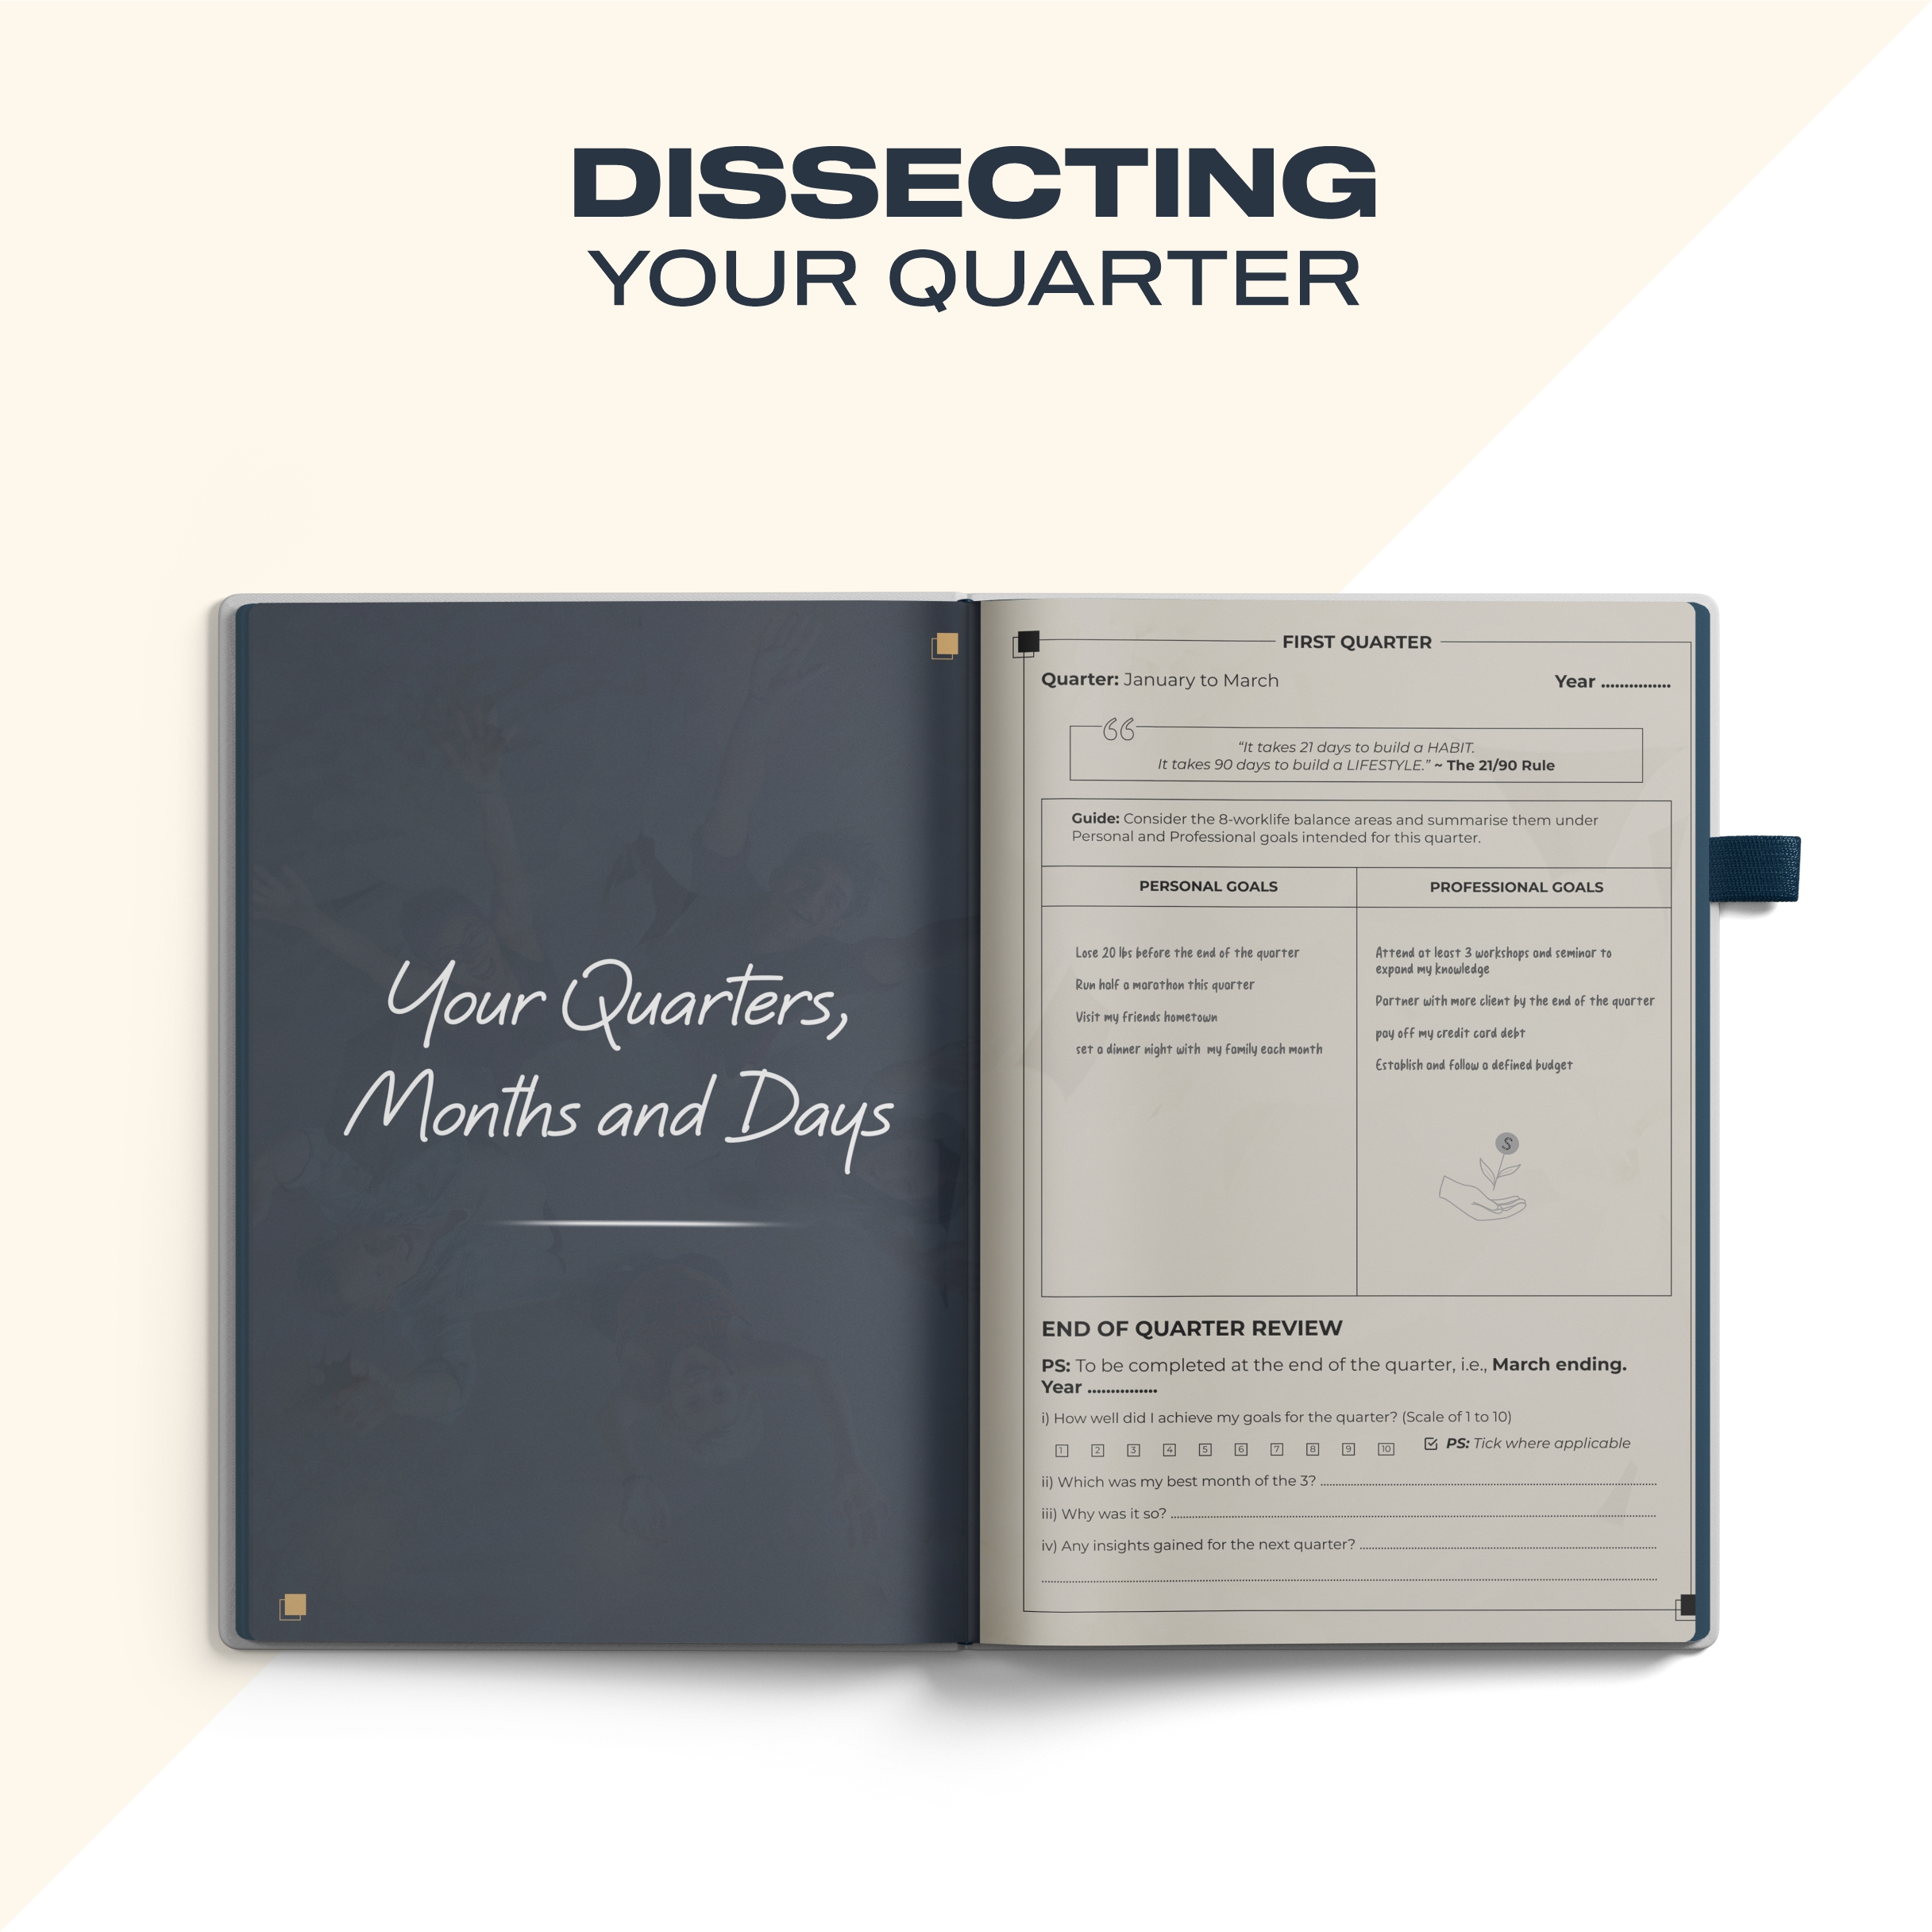 Disecting your quarter